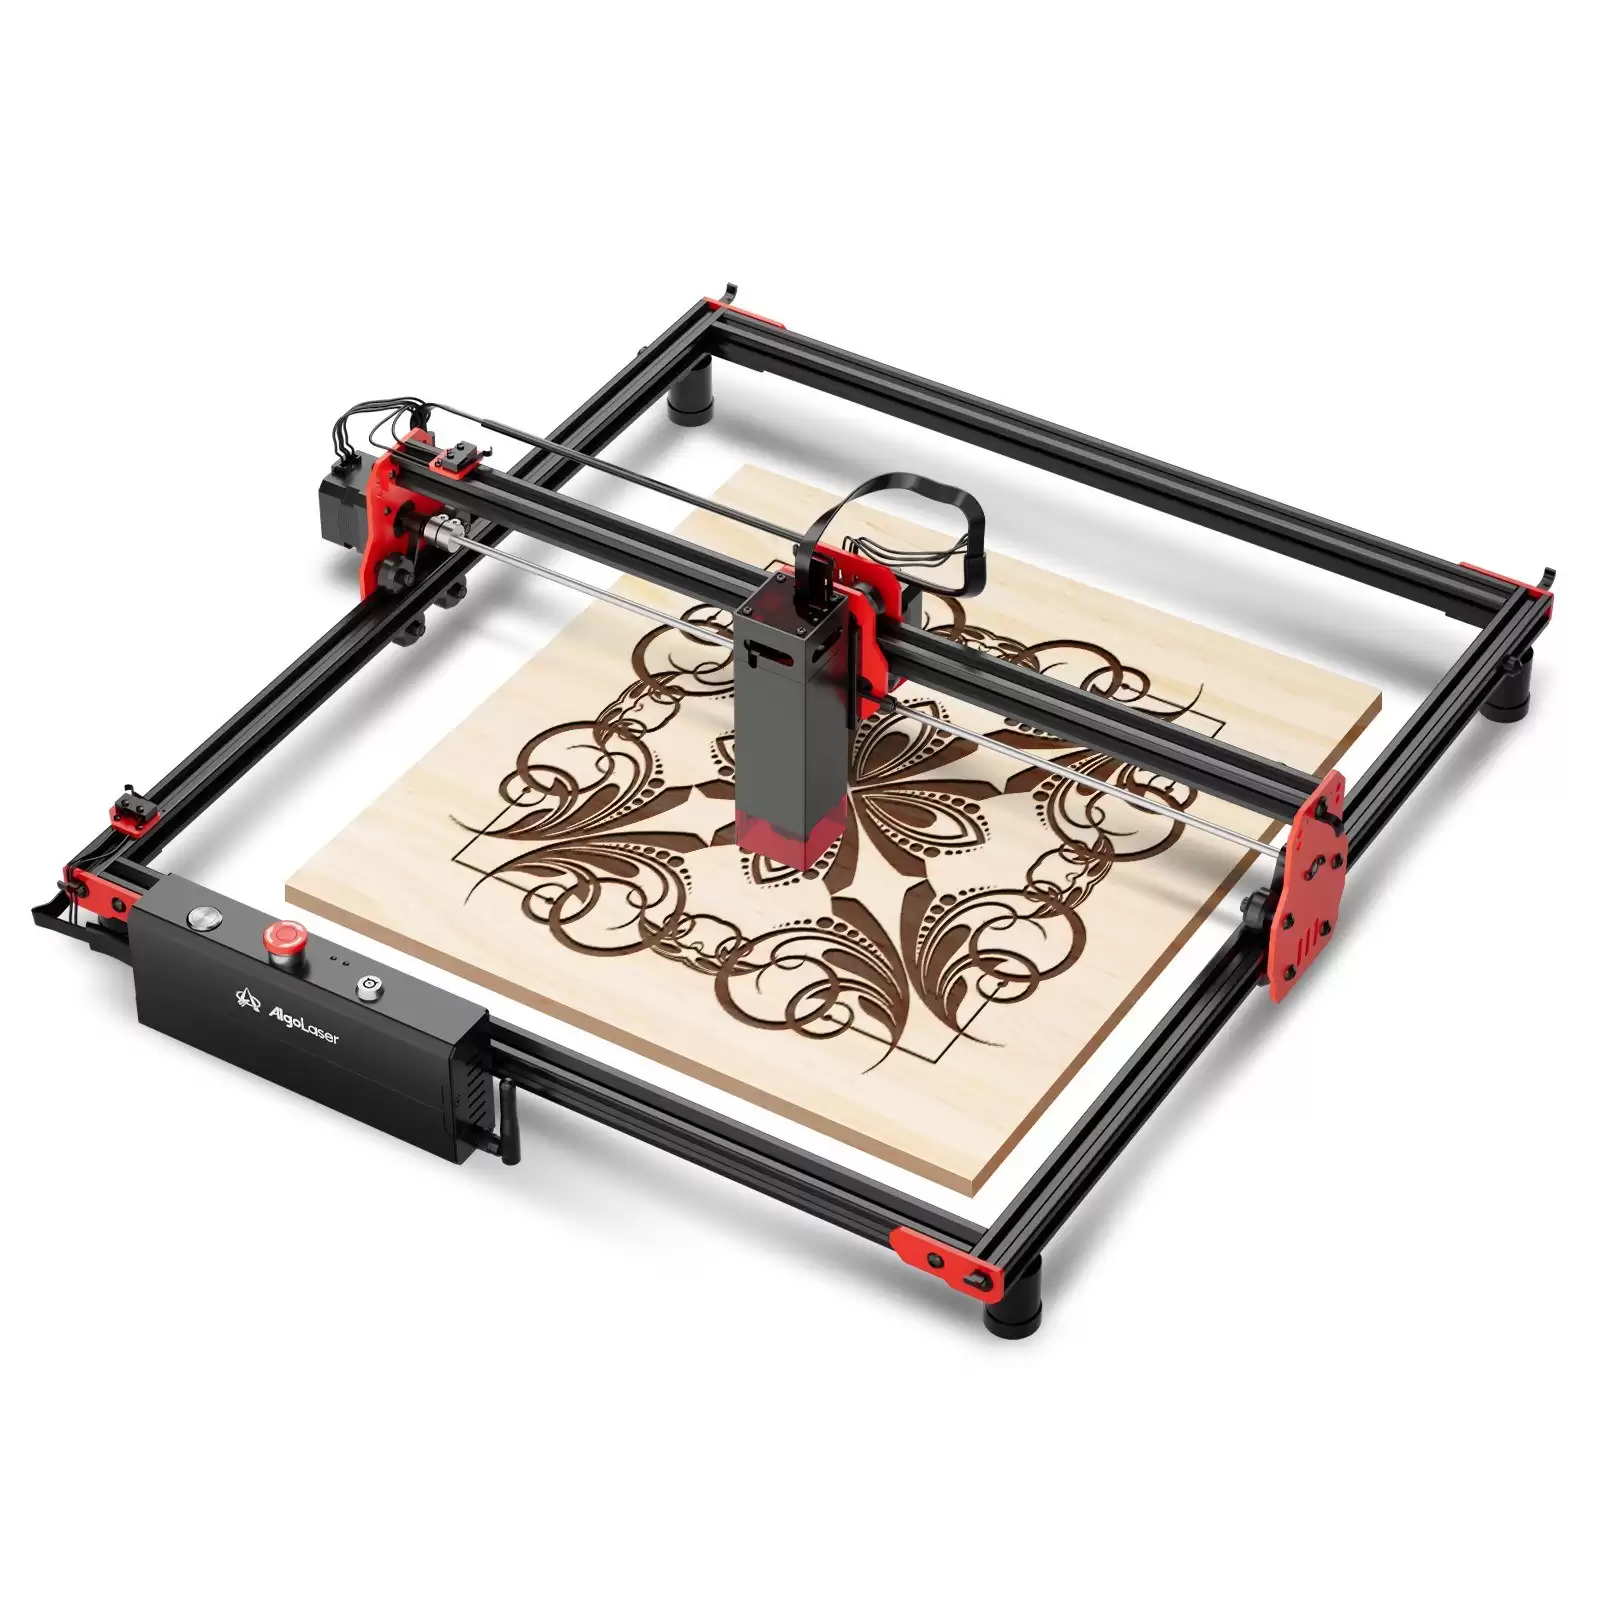 Order In Just $291.99 Algolaser Diy Kit 10w Laser Engraver With This Discount Coupon At Tomtop